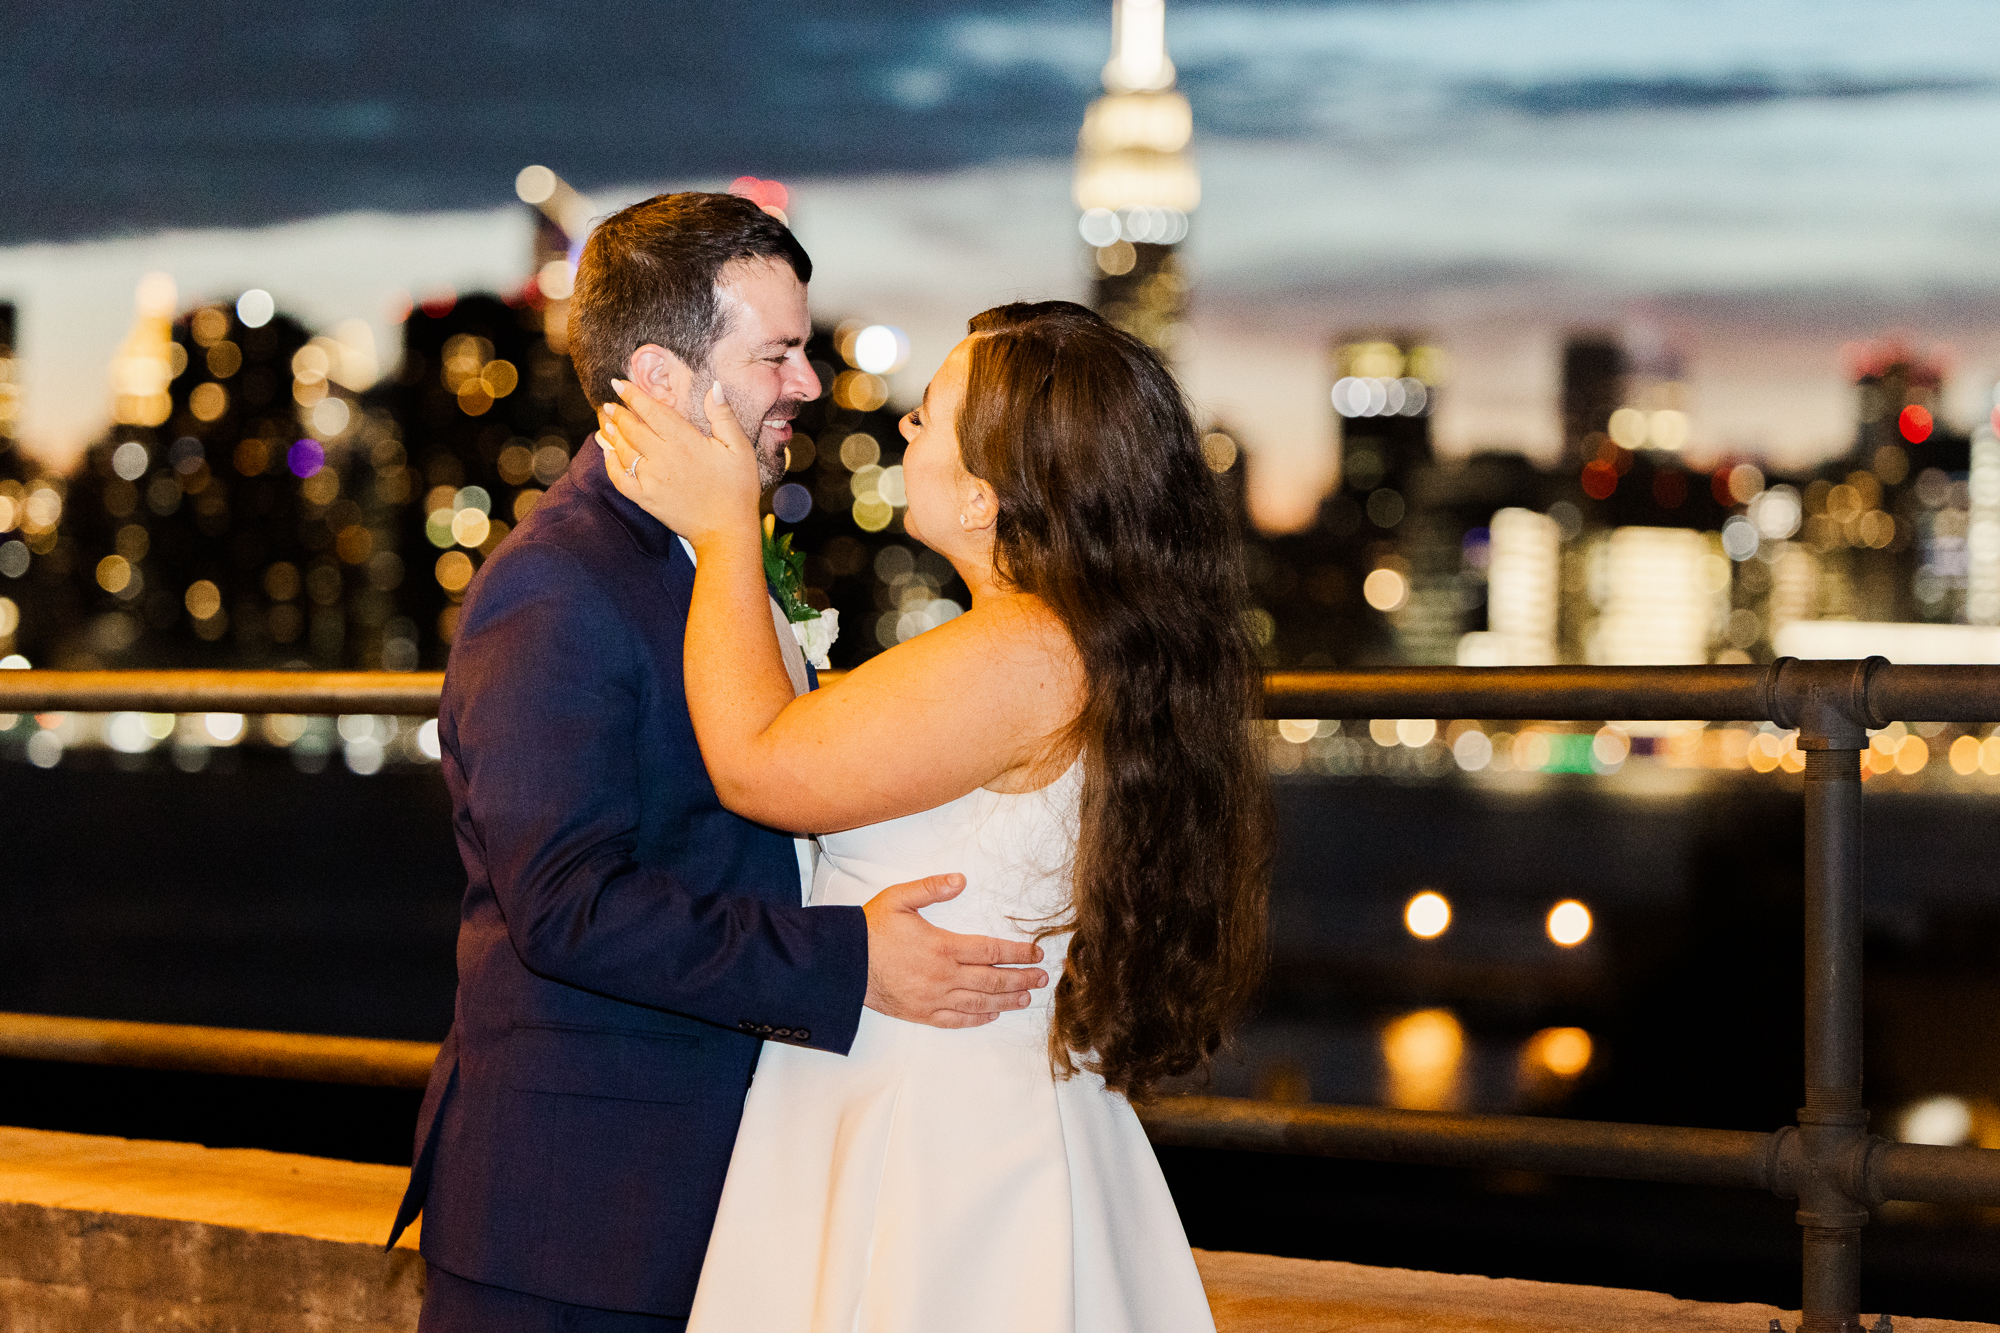 Lively Indoor and Outdoor Wedding Venues, NYC